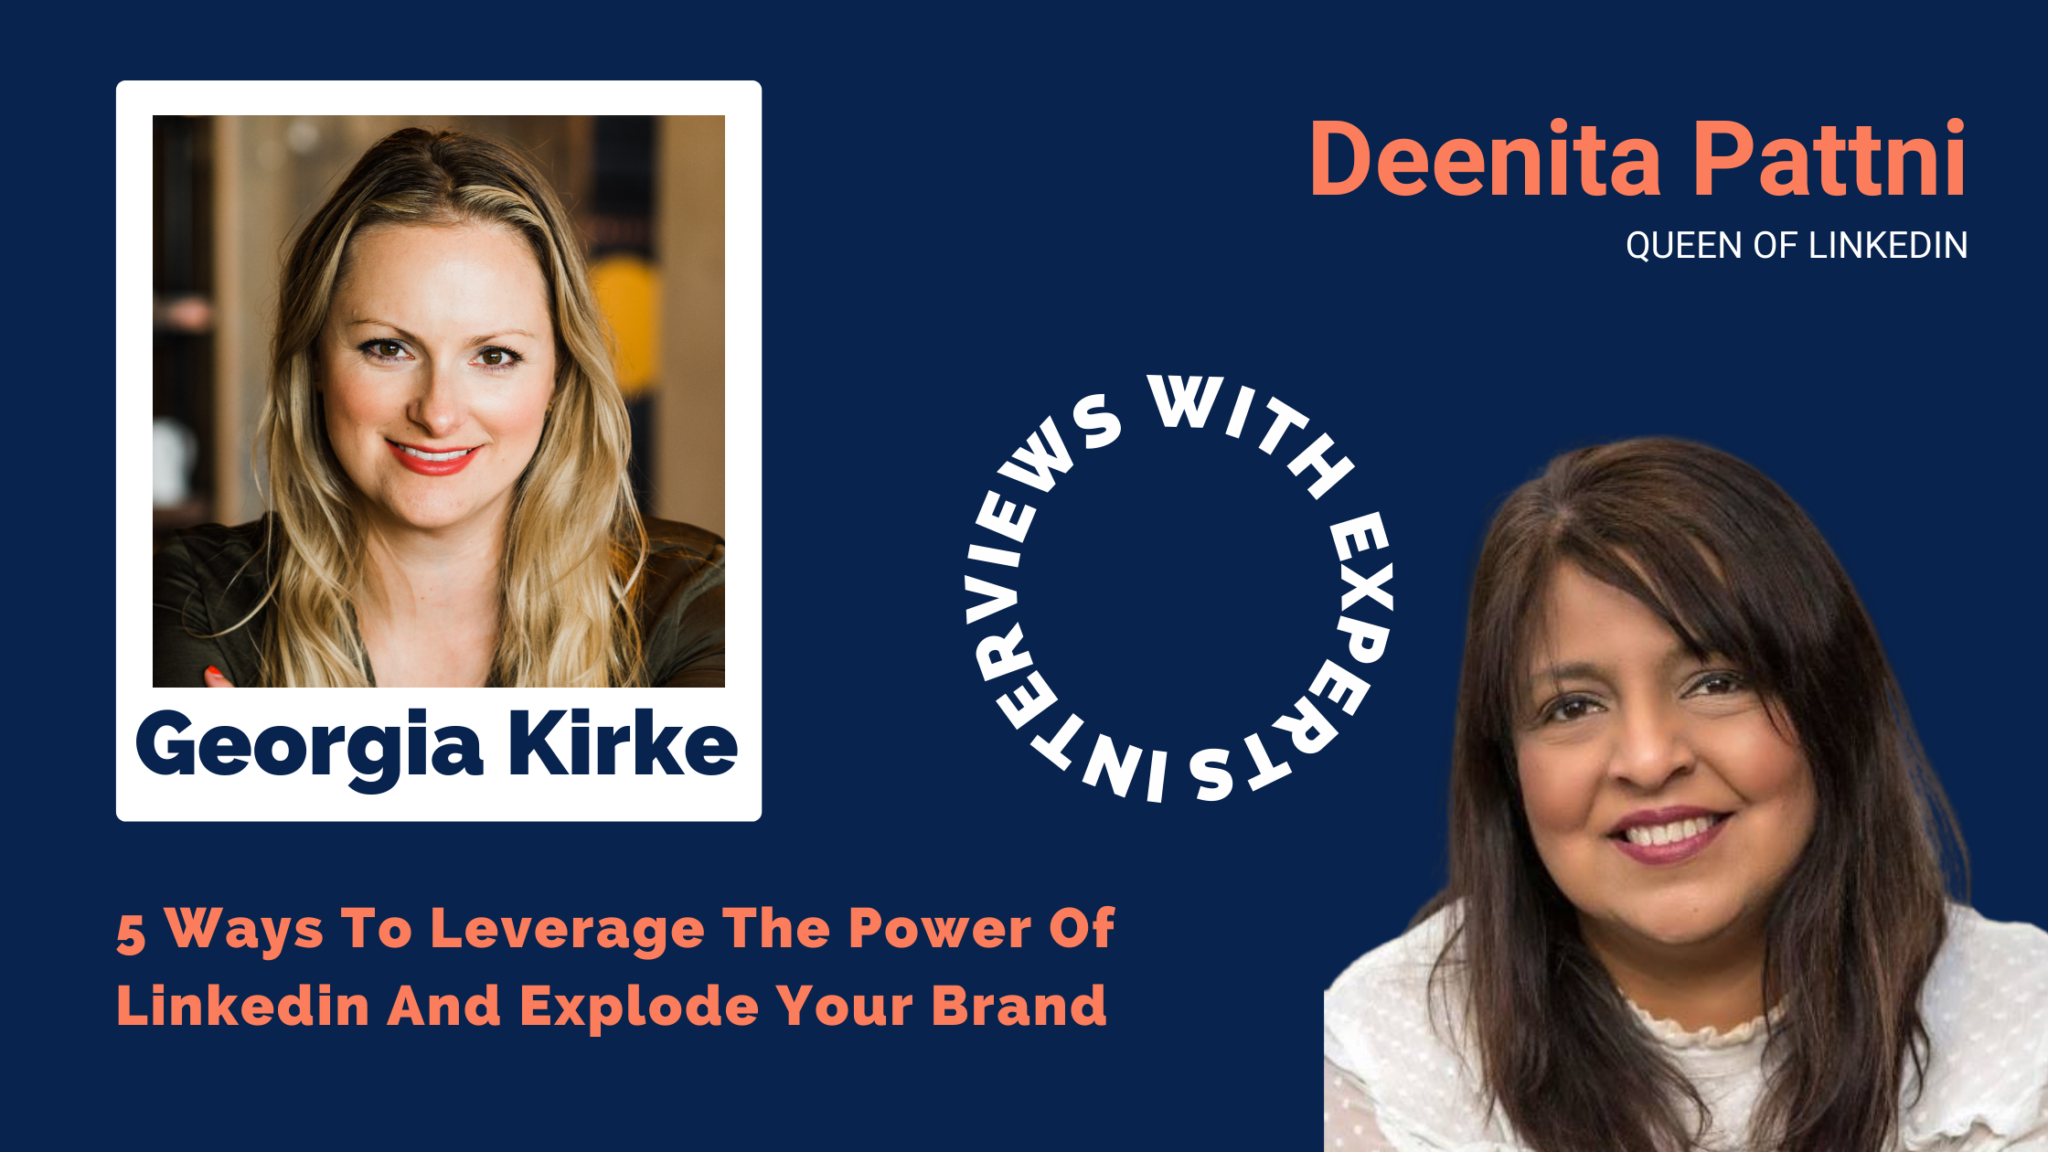 5 Ways To Leverage The Power Of Linkedin And Explode Your Brand By Georgia Kirke with special guest Deenita Pattni